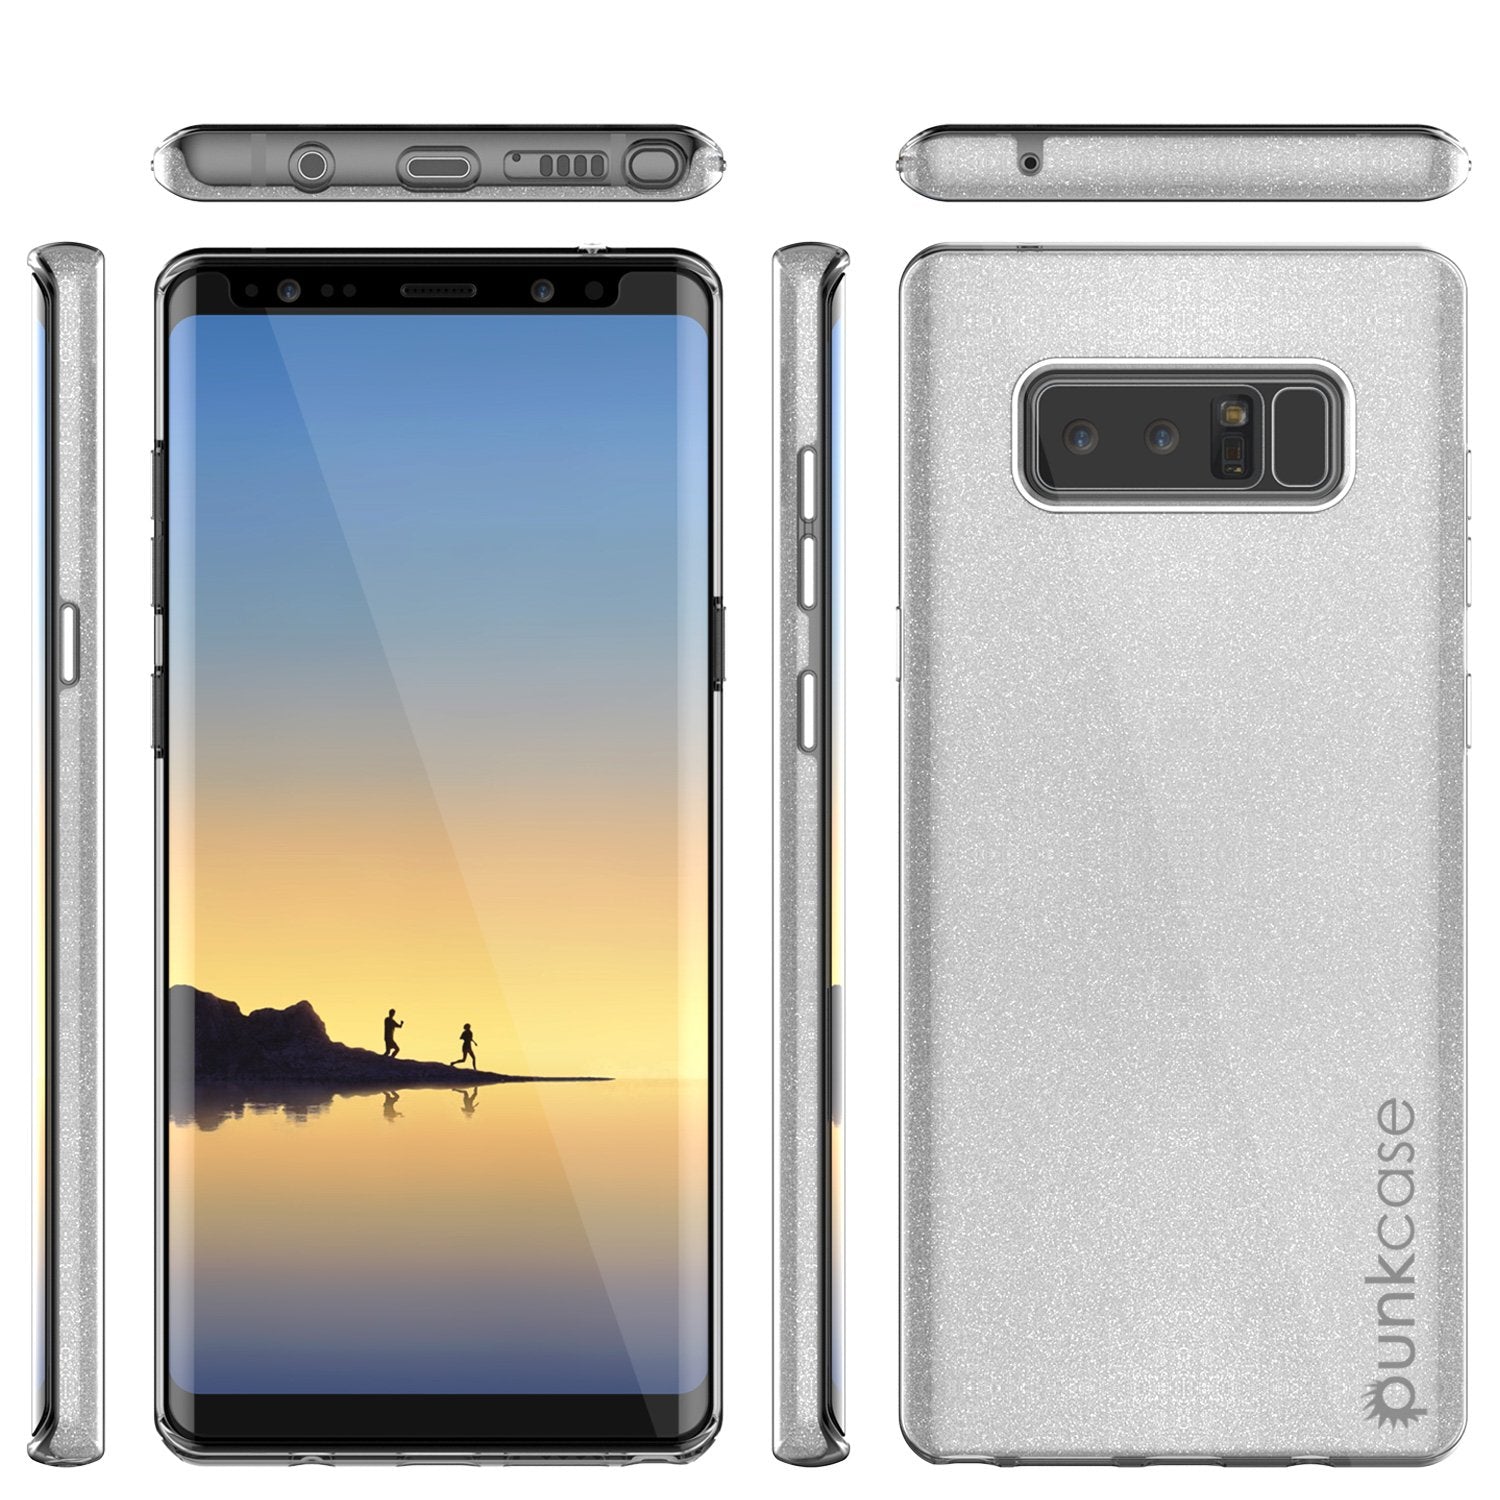 Galaxy Note 8 Case, Punkcase Galactic 2.0 Series Ultra Slim Protective Armor [Silver] - PunkCase NZ